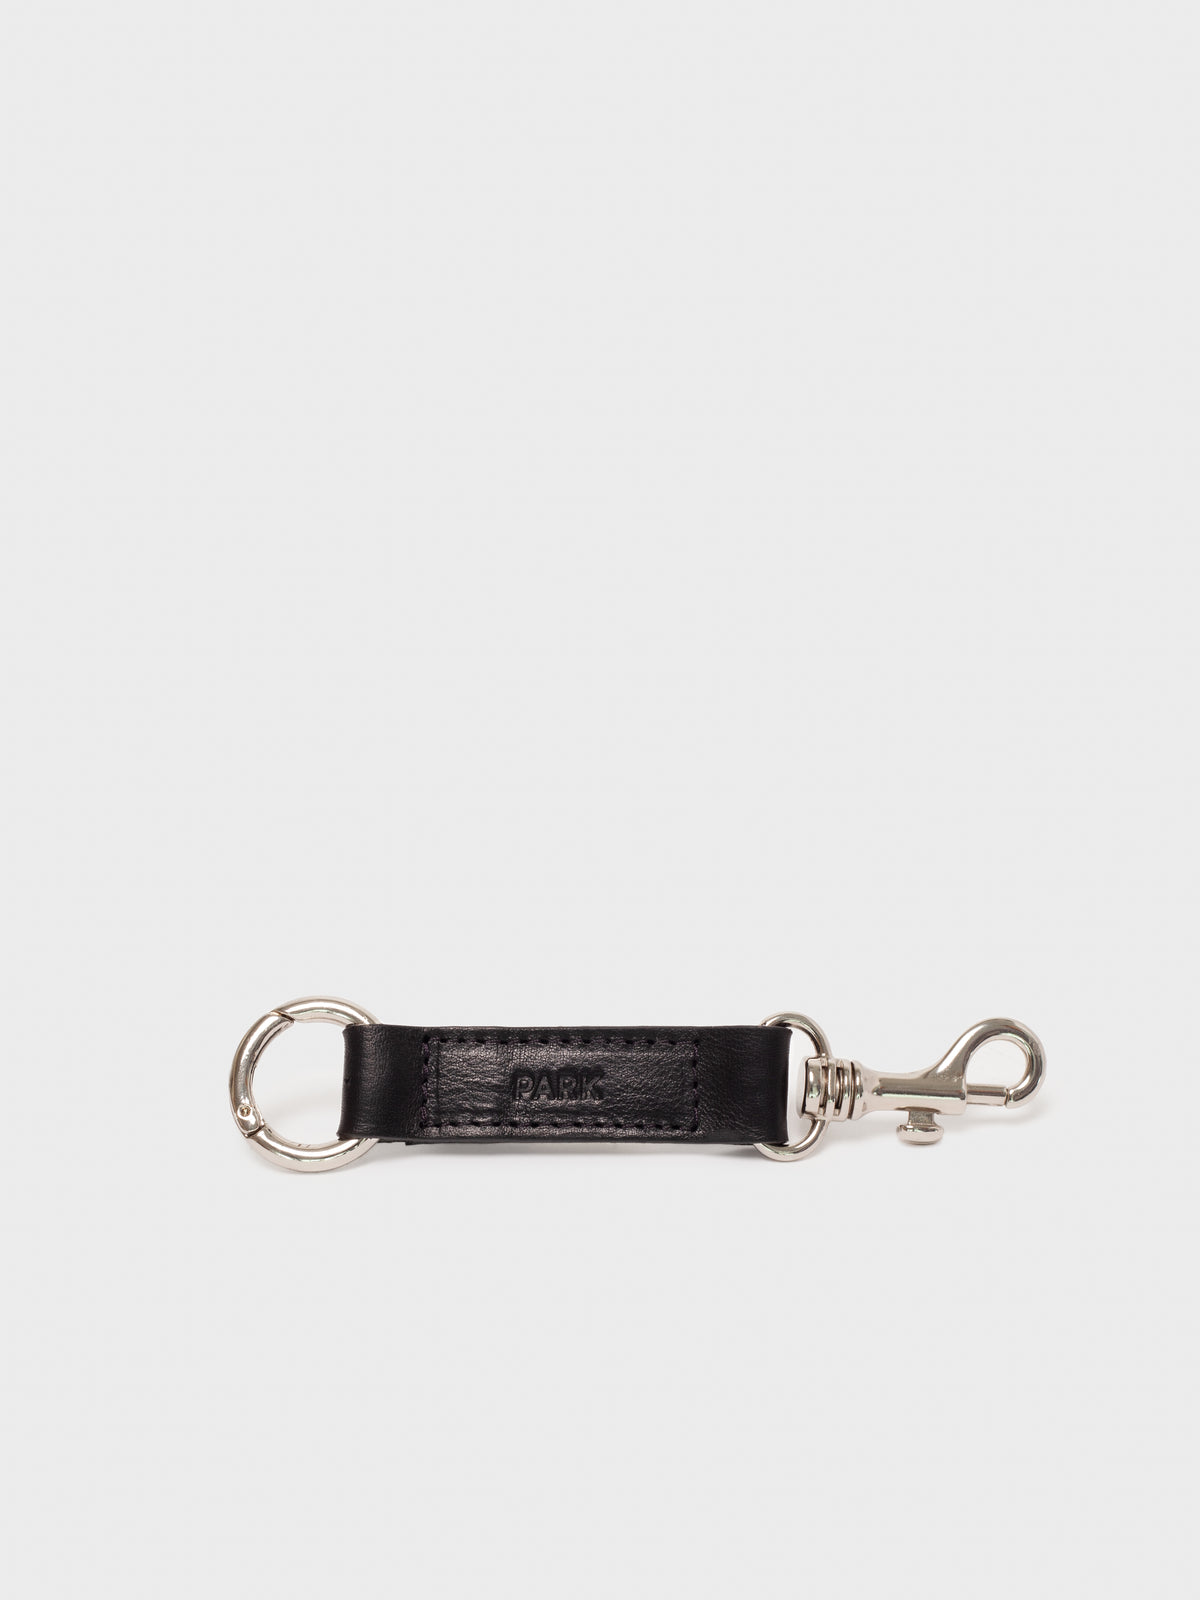 Keychain I by Park Bags black